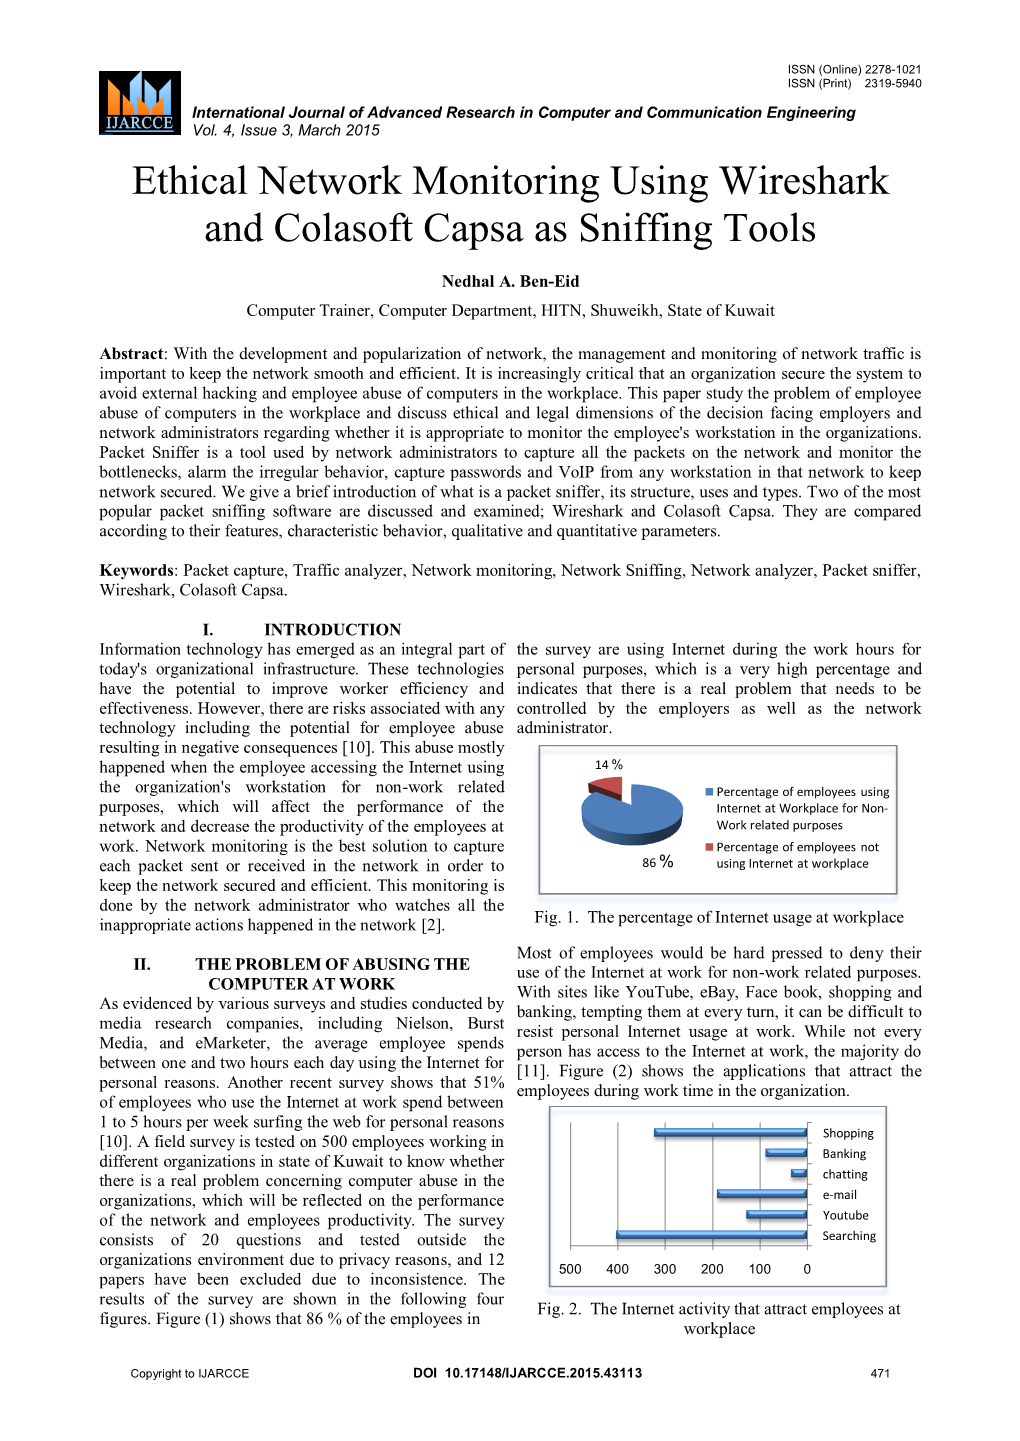 Ethical Network Monitoring Using Wireshark and Colasoft Capsa As Sniffing Tools